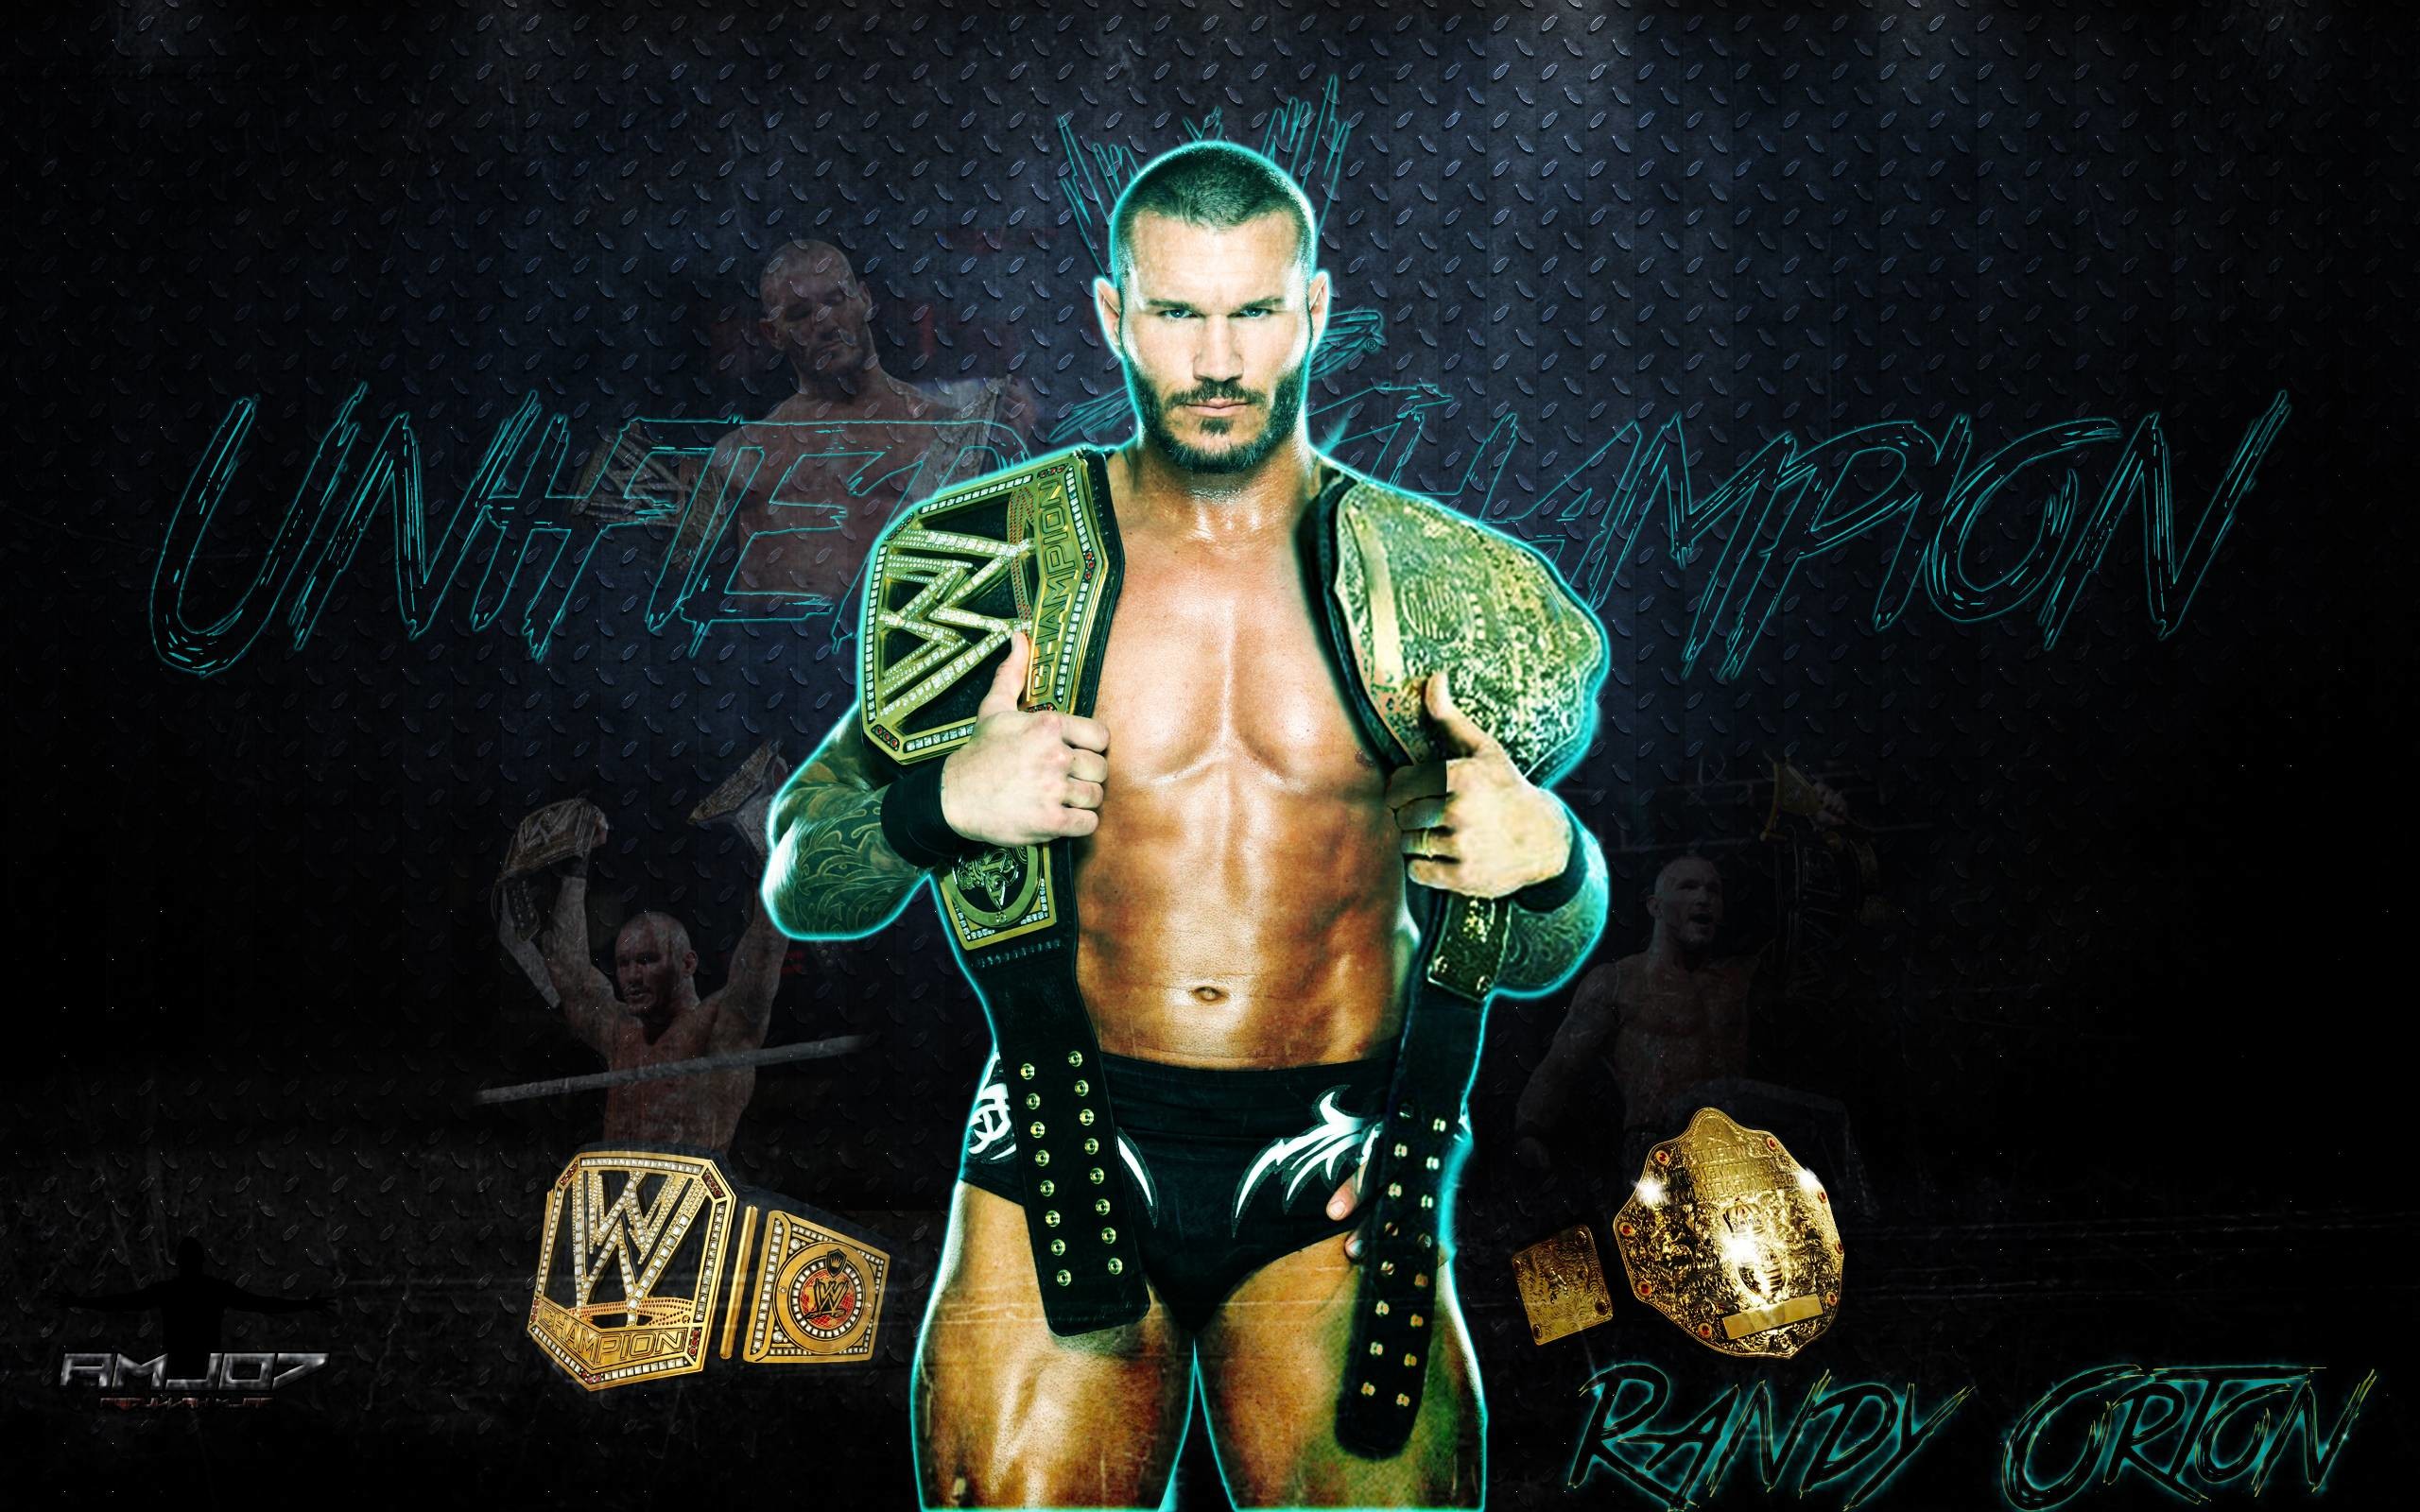 Randy orton wallpapers pictures